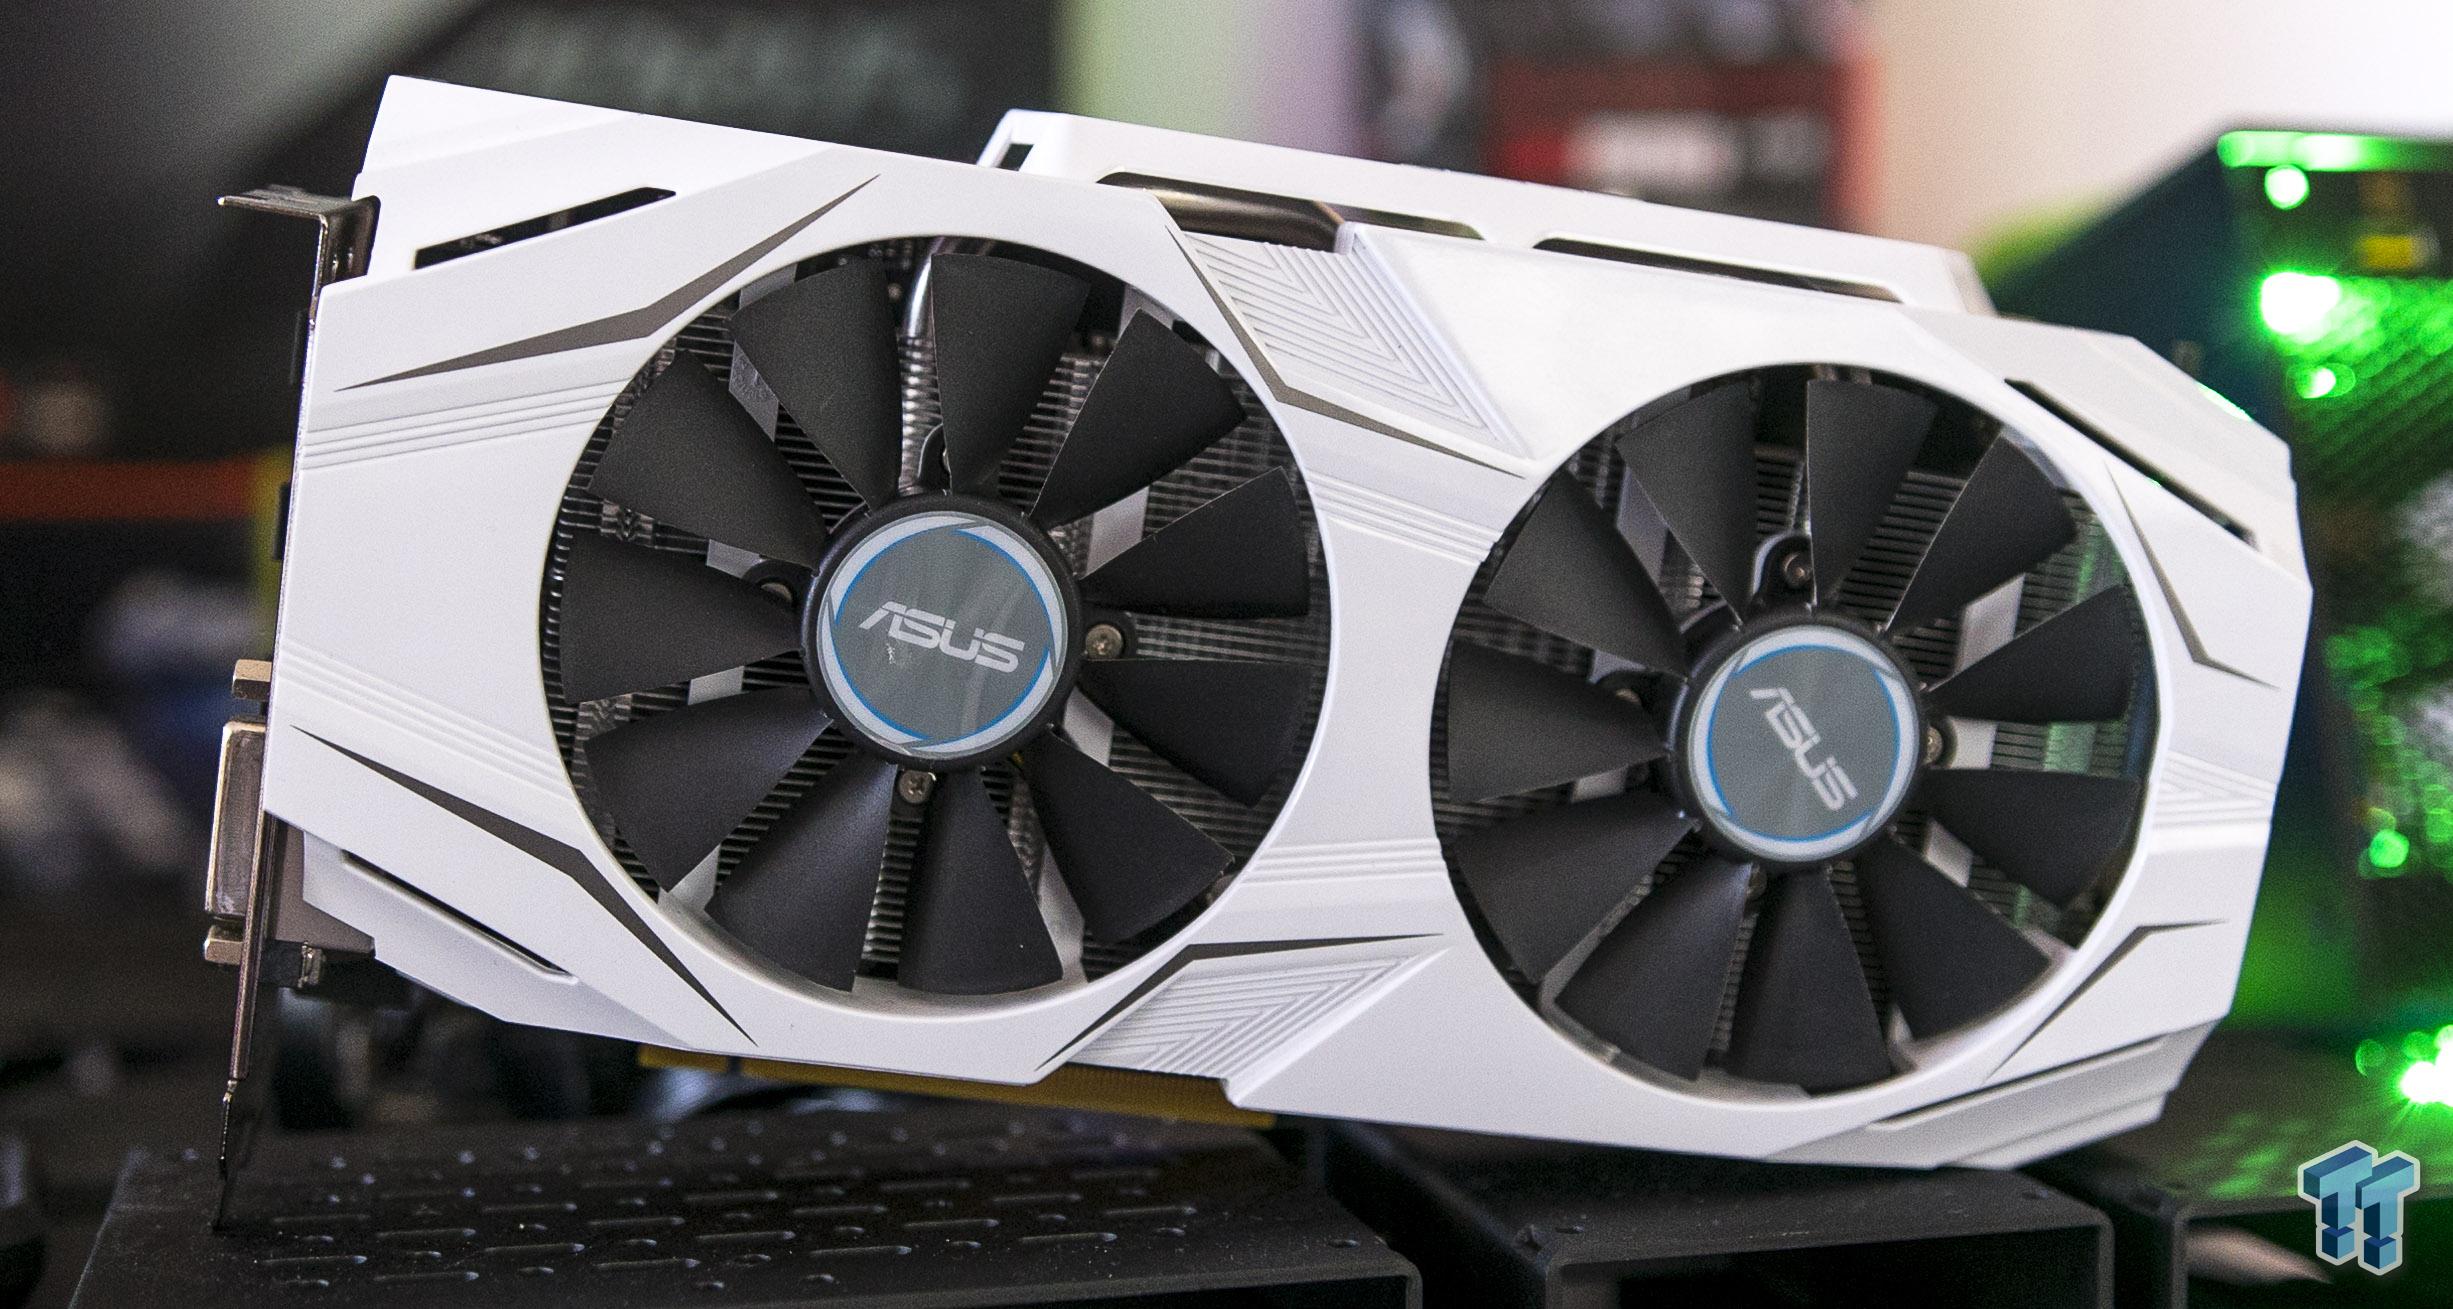 ASUS GeForce GTX Dual 3G: On The Cheap